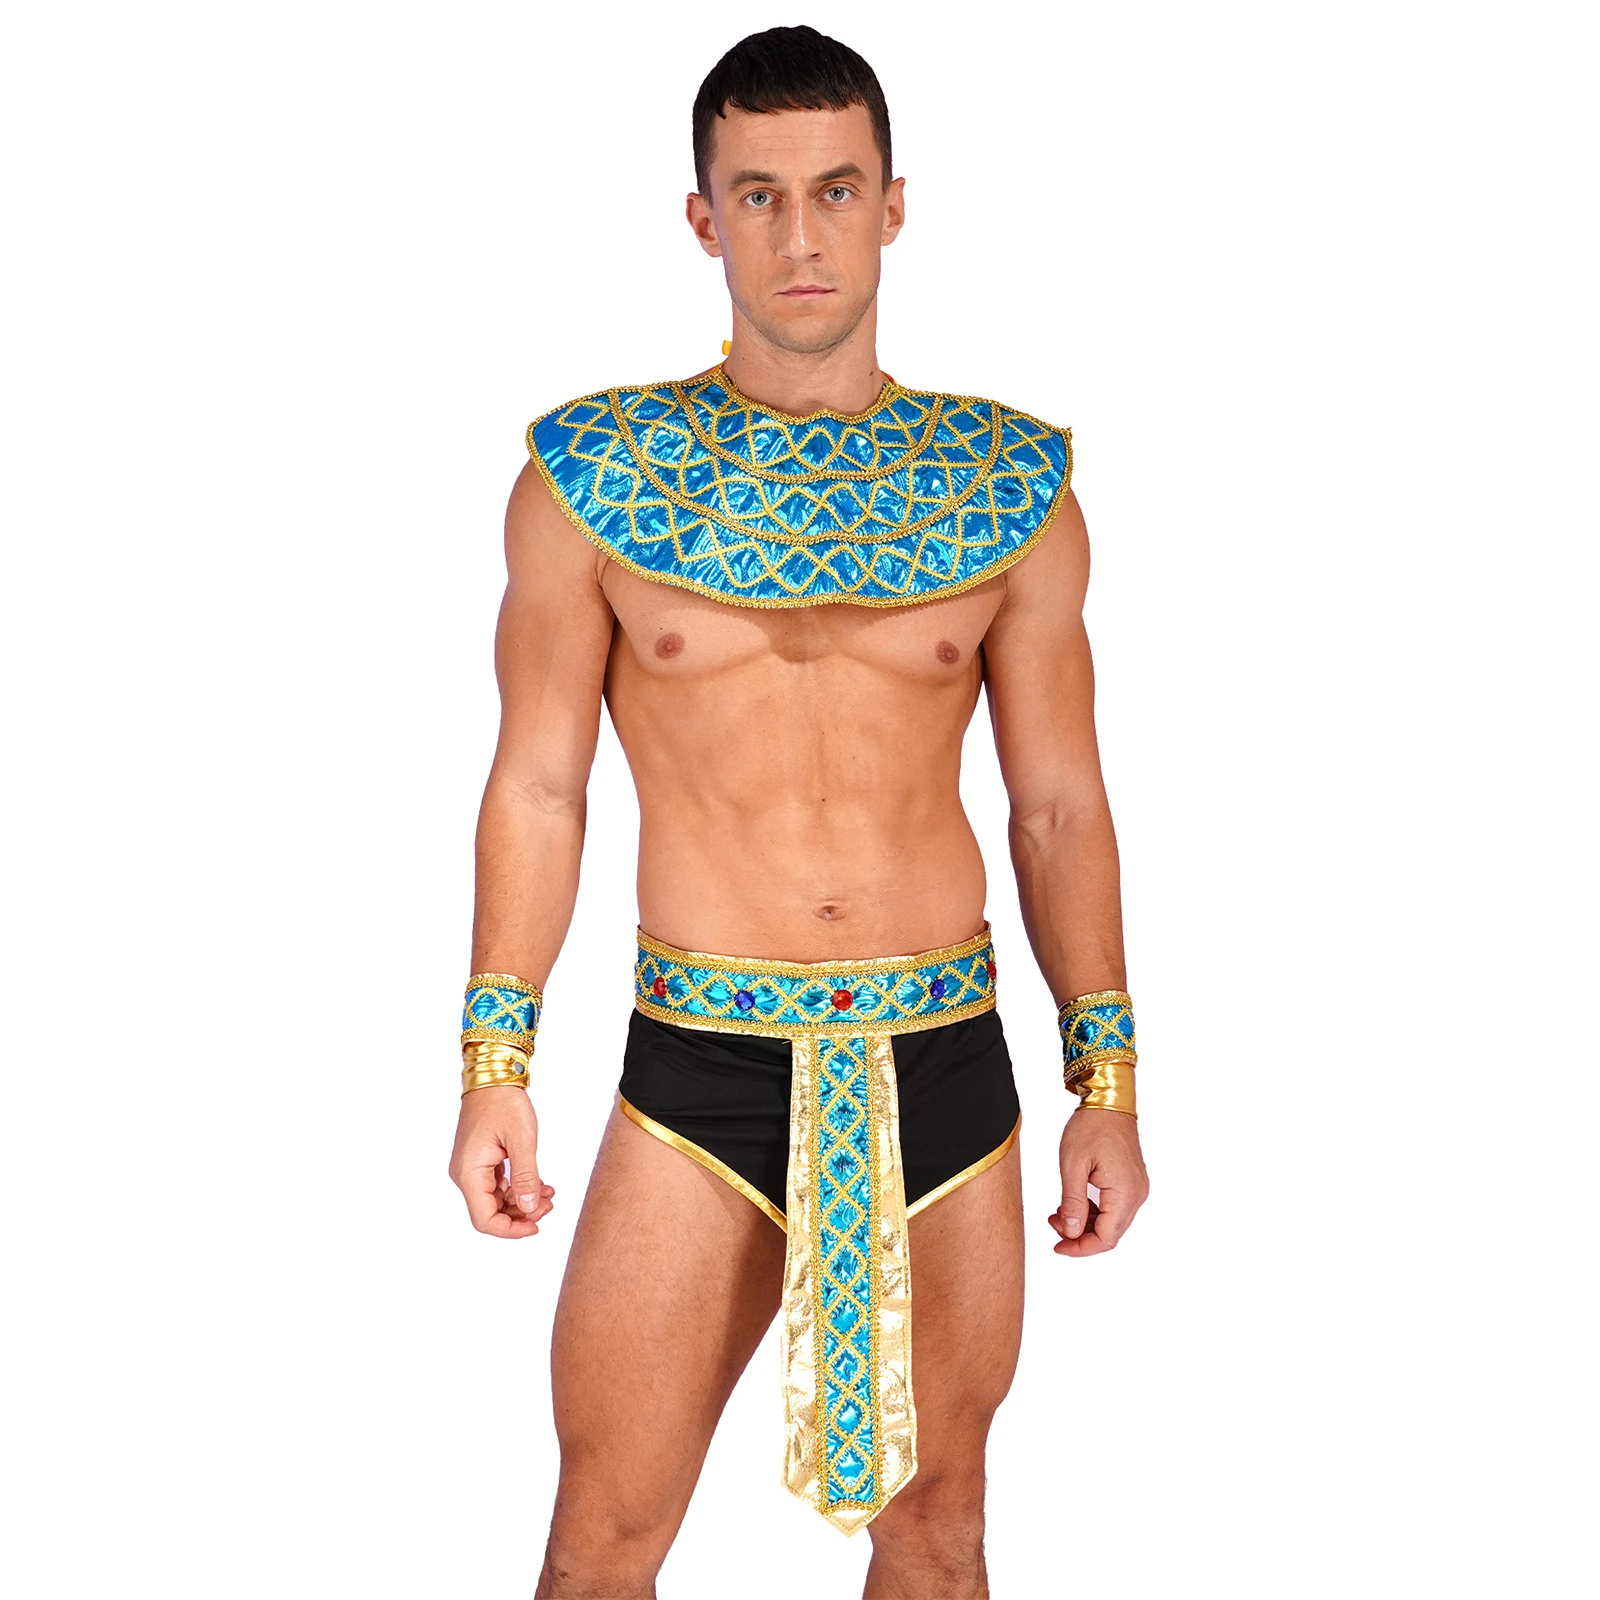 

Mens Roman Gladiator Costume Halloween Cosplay Armor Soldier Role Play Medieval Knight Warrior Miniskirts with Faux Collar Belt